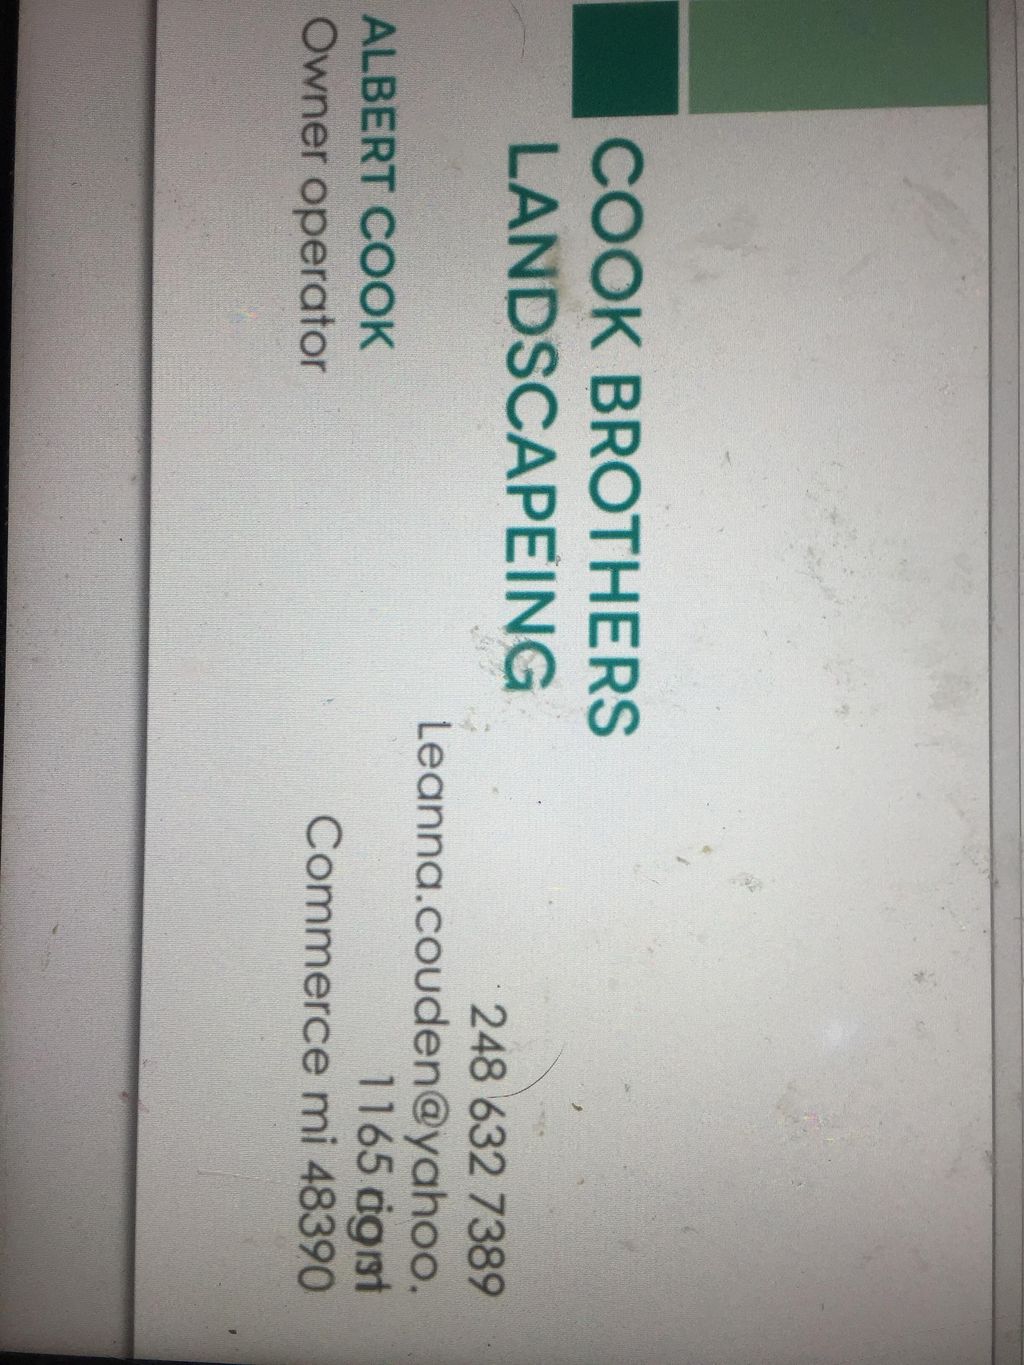 Cook brothers landscaping